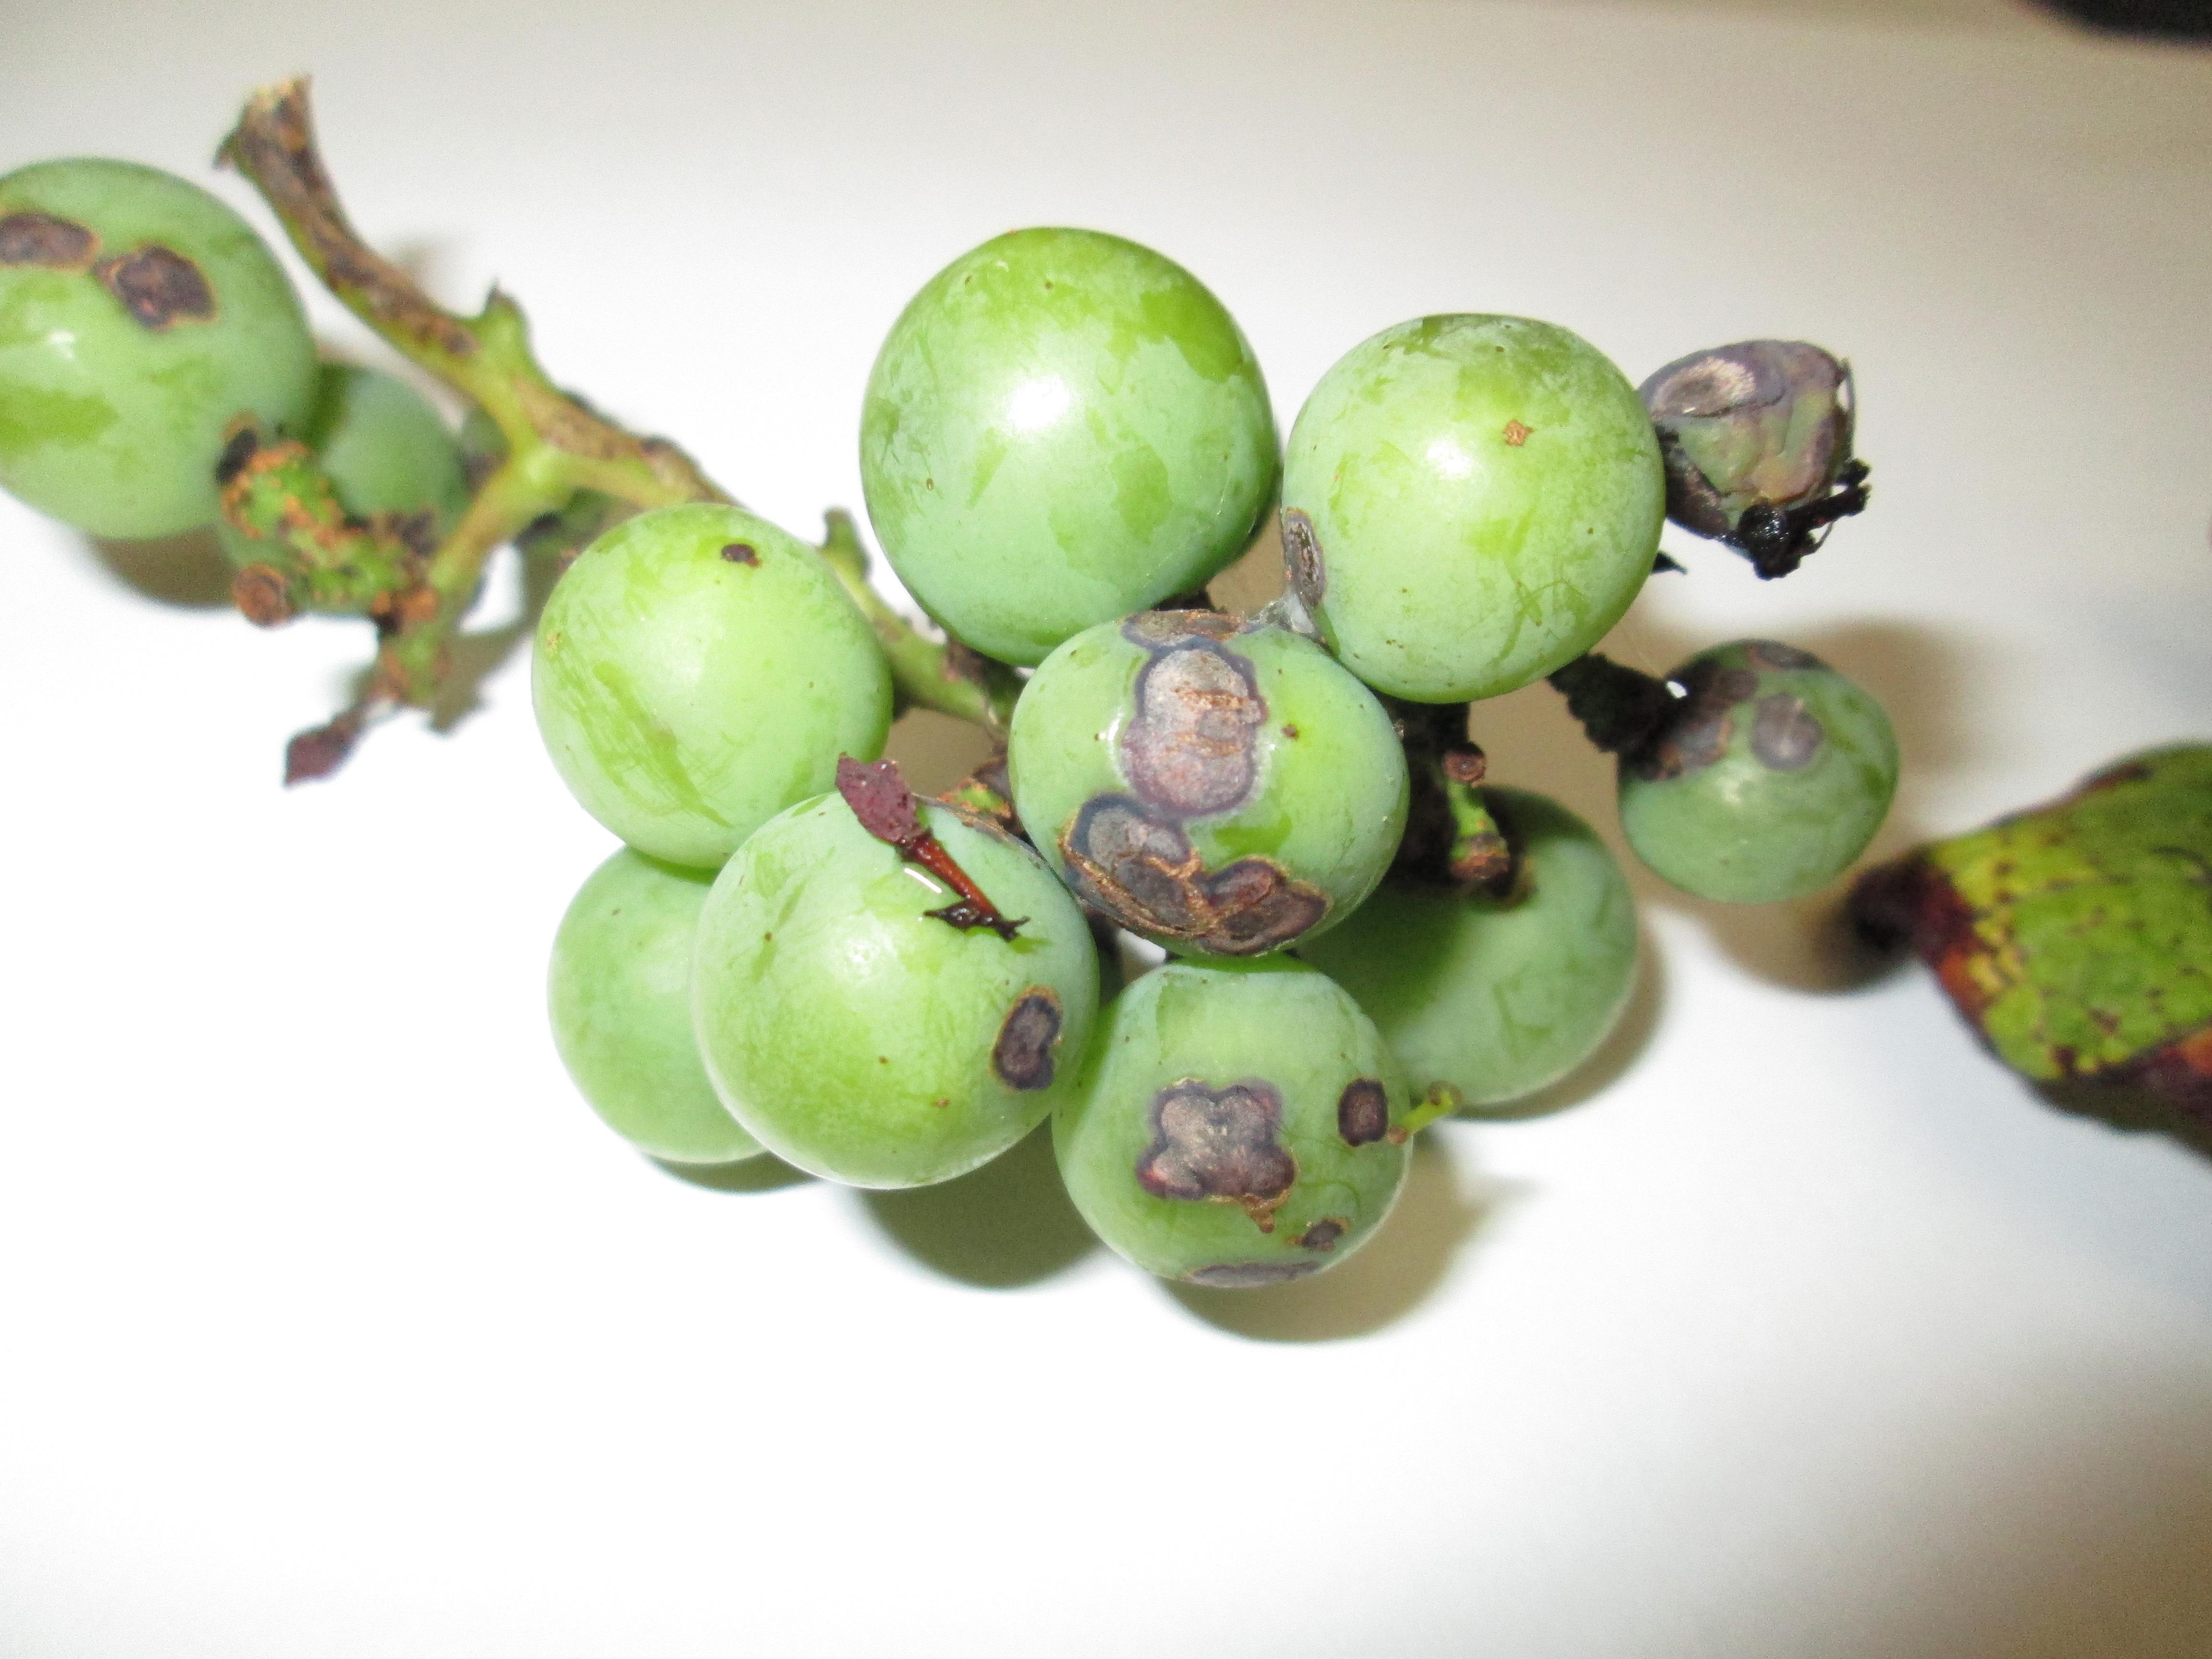 Fungal disease makes Concord grapes a poor choice for ENC - News ...